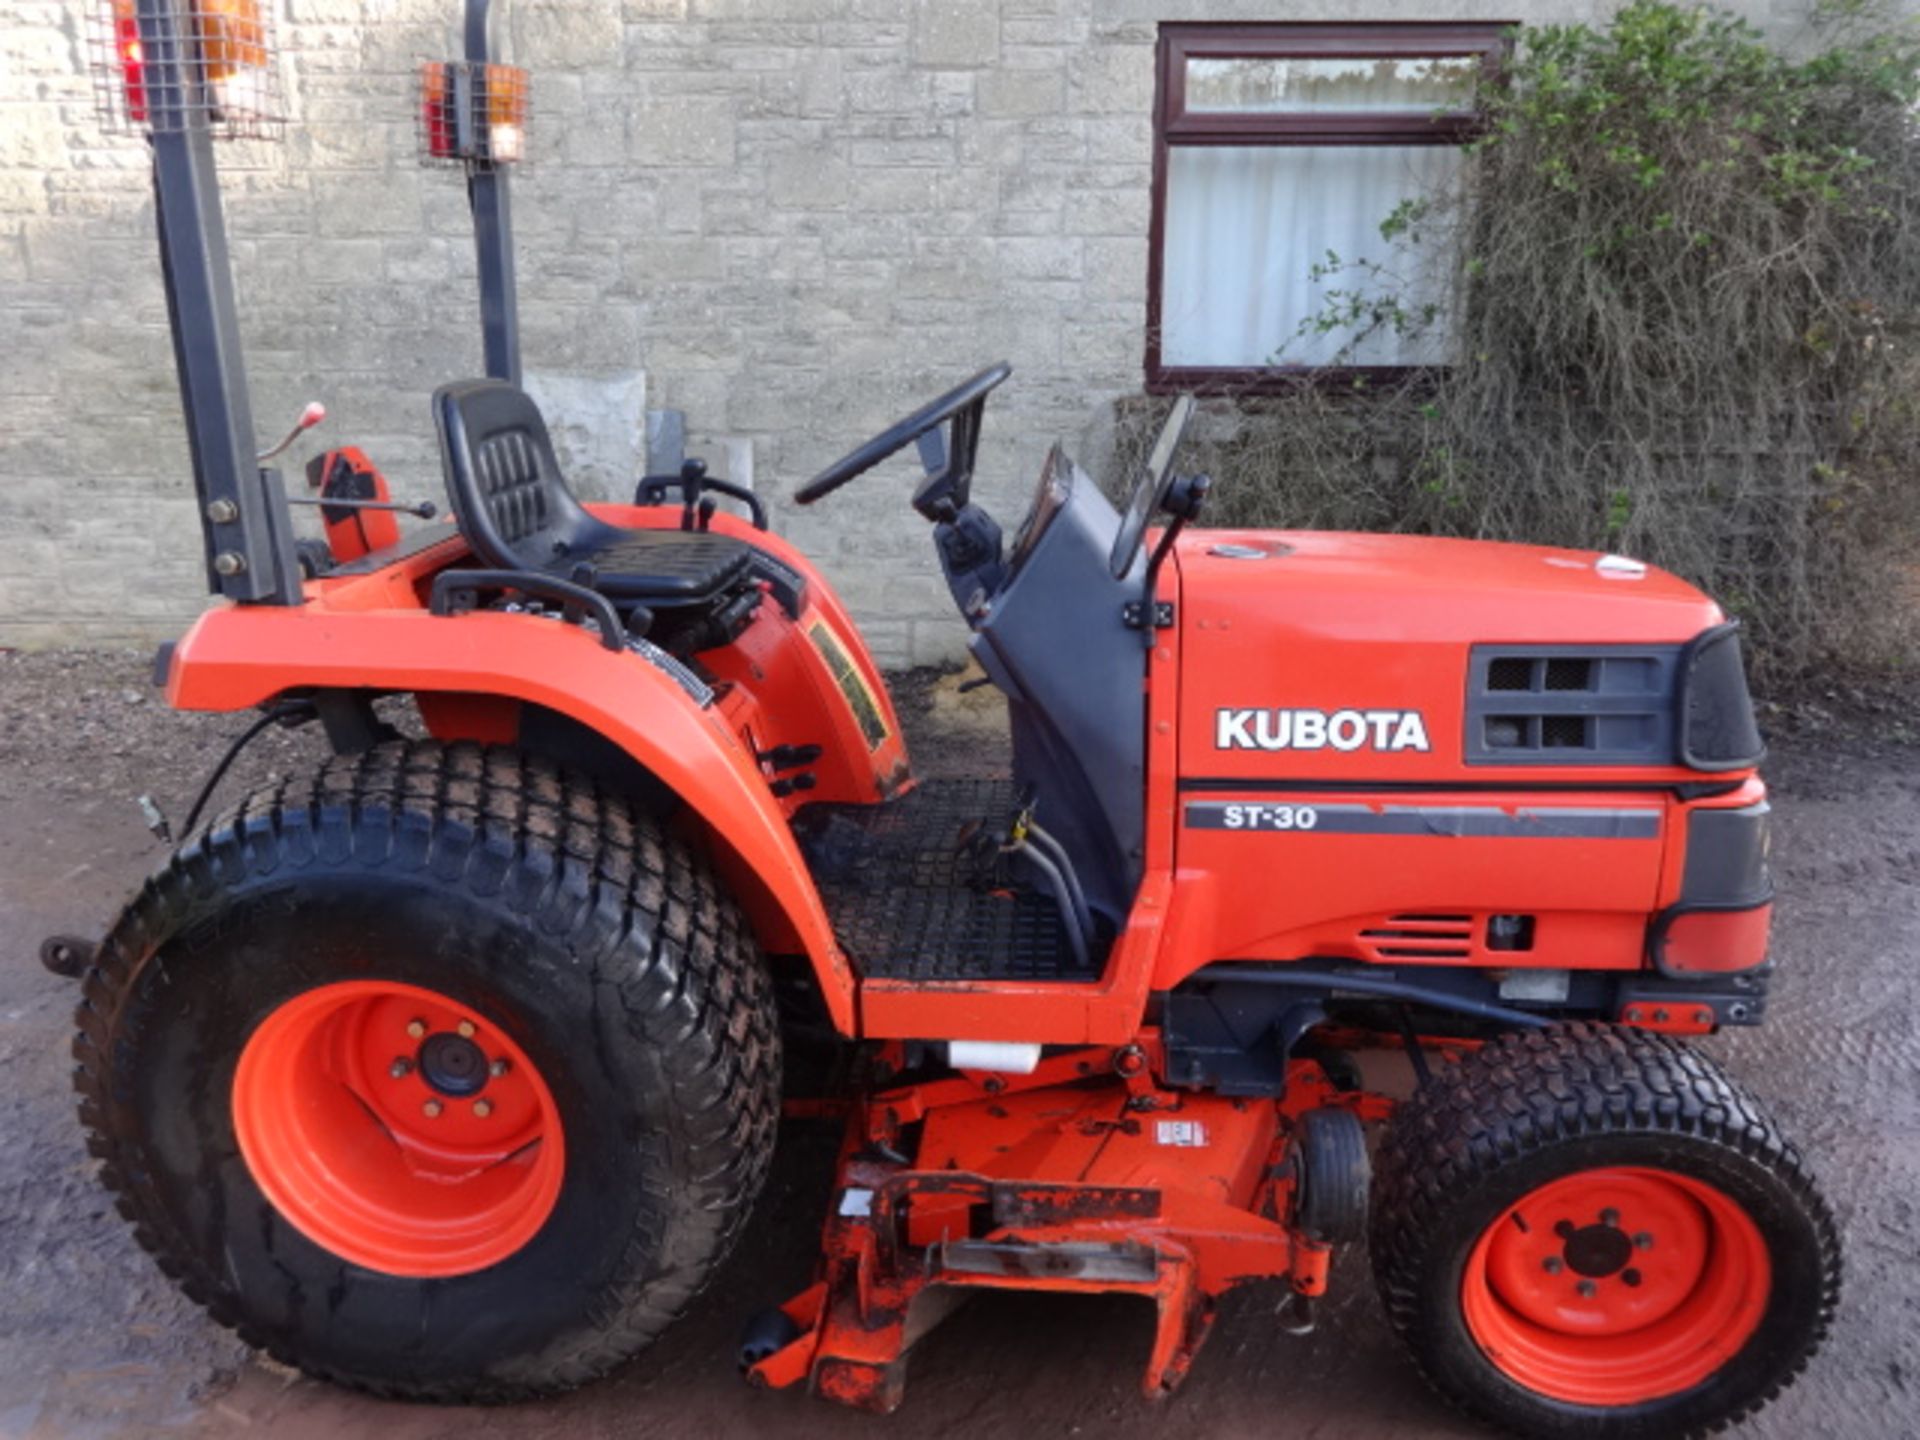 KUBOTA ST30 COMPACT TRACTOR WITH MOWER DECK - Image 6 of 6